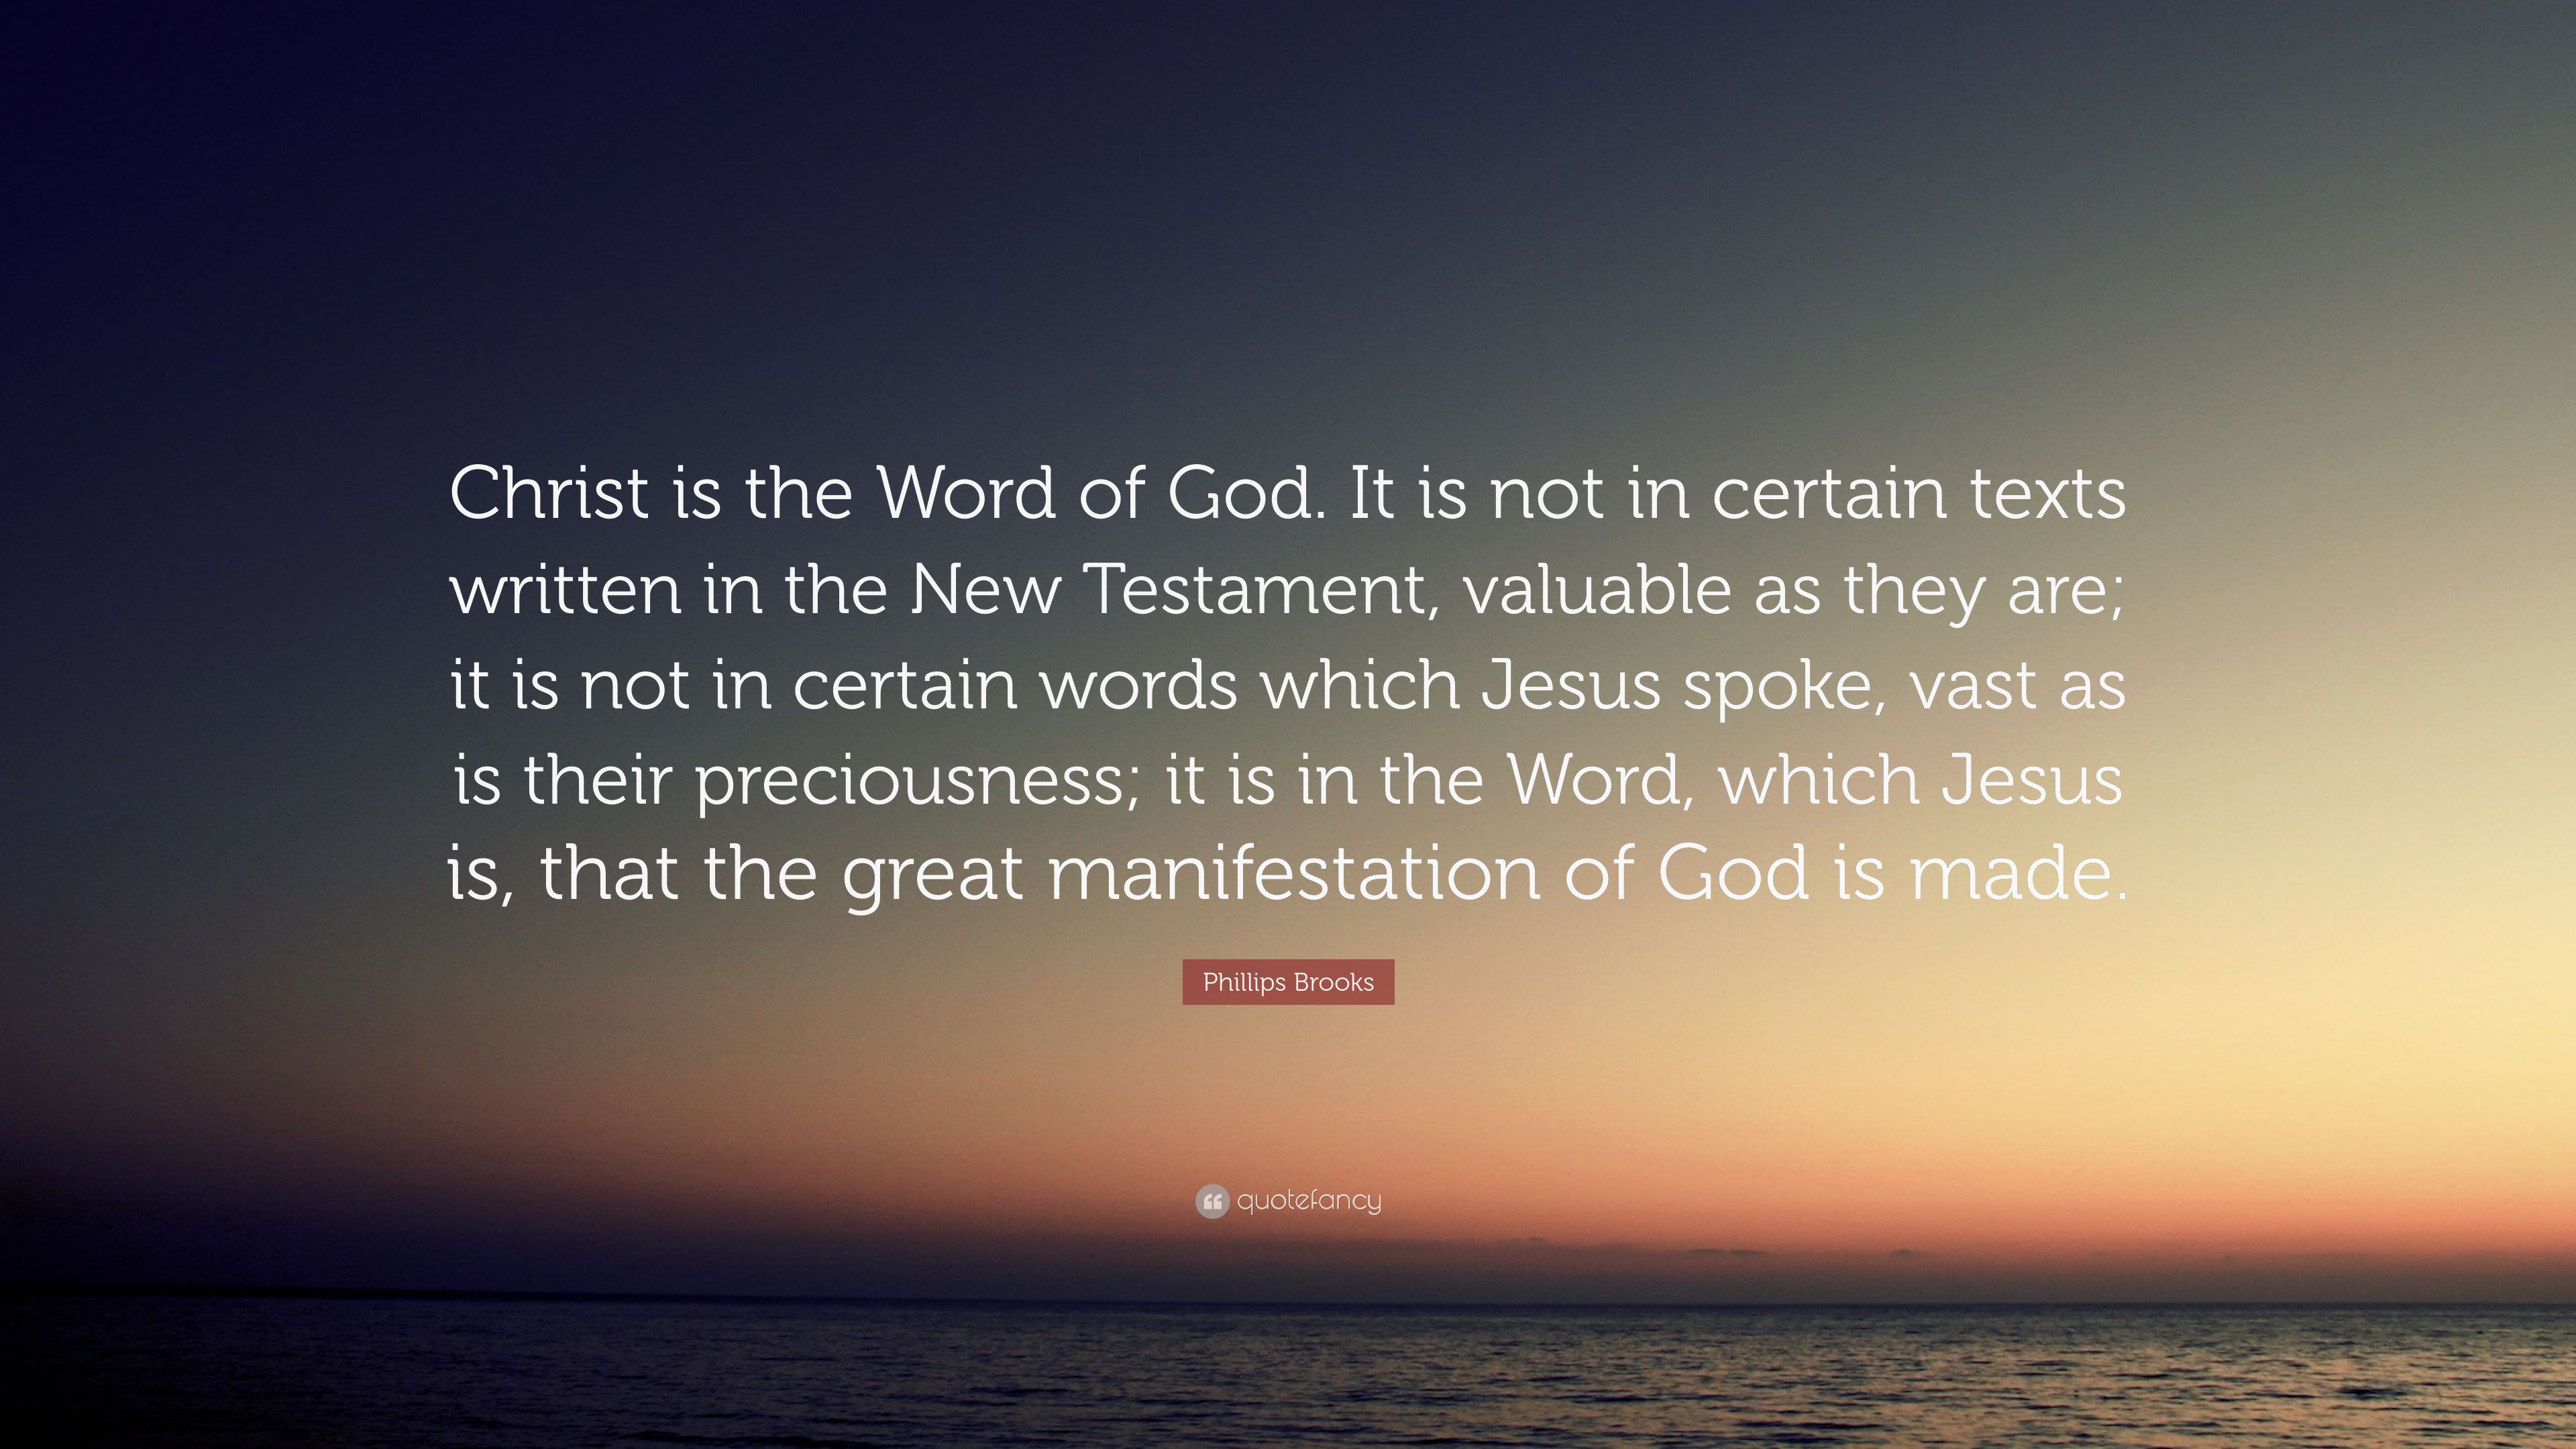 Phillips Brooks Quote: “Christ is the Word of God. It is not in certain texts written in the New Testament, valuable as they are; it is not in c.” (7 wallpaper)